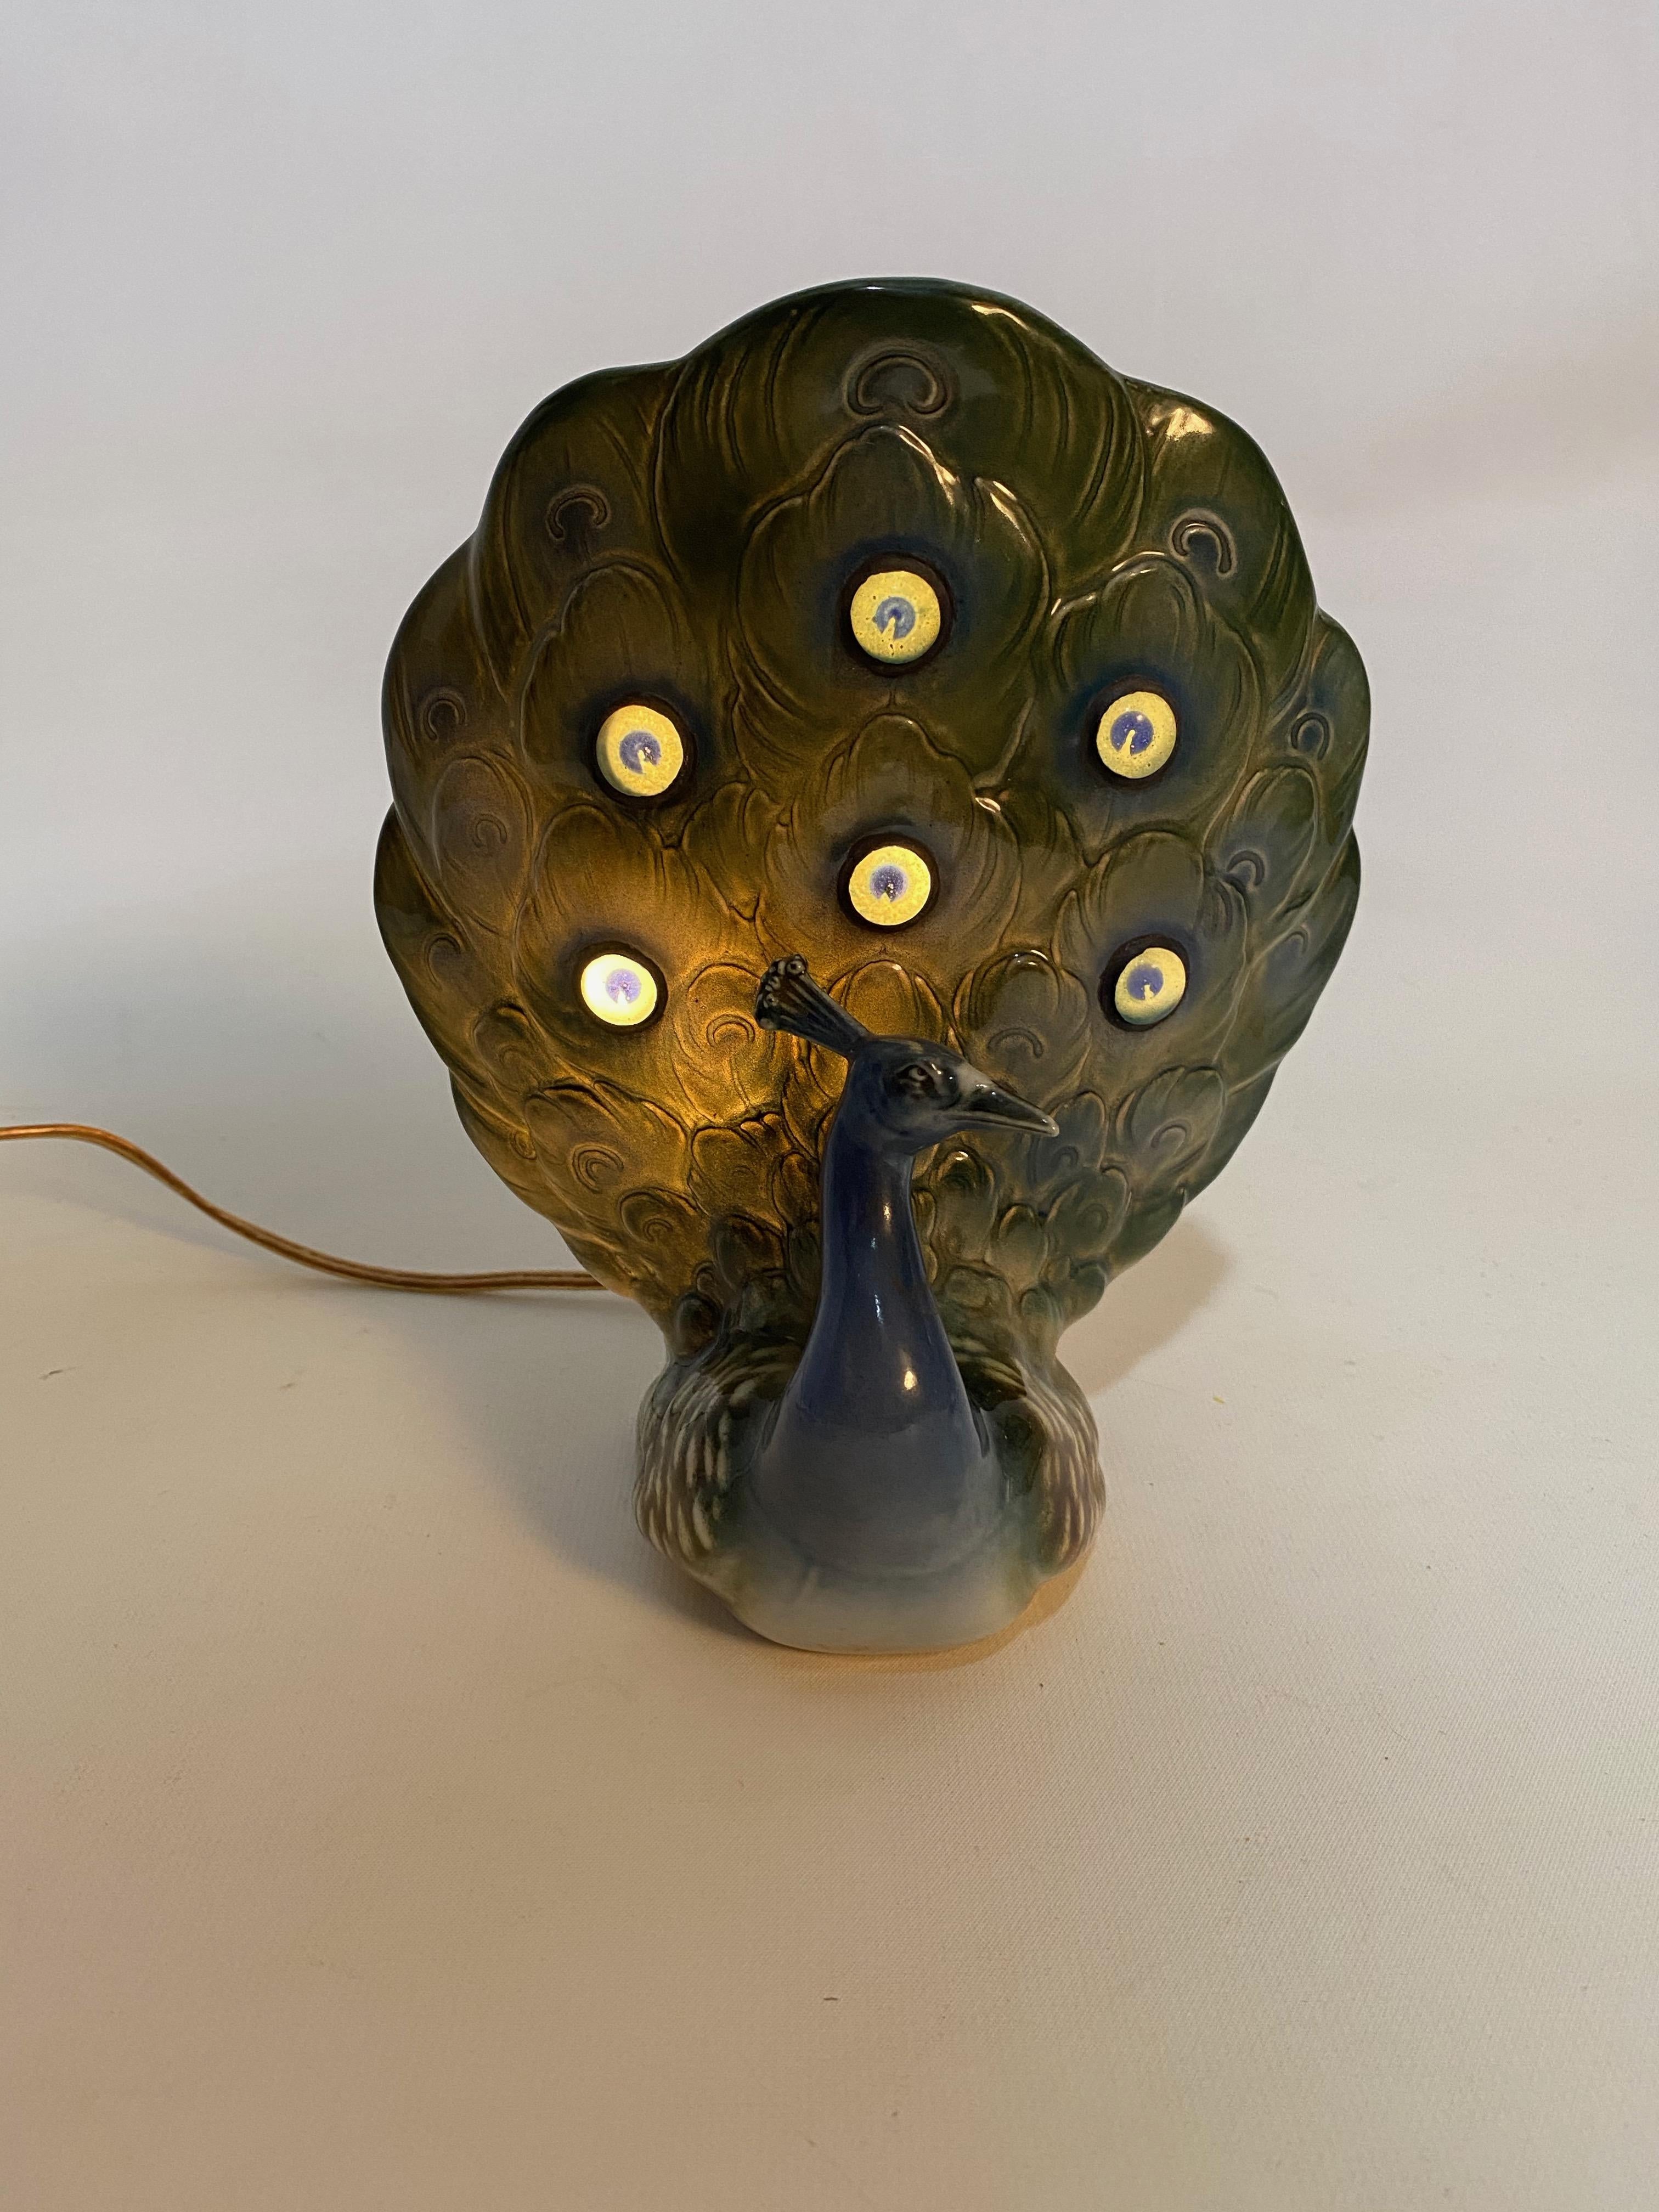 Signed Capodimonte jeweled paste porcelain peacock lamp. Wonderful elegant accent table lamp. Soft low light, circa 1960-1970. Original wiring in good condition. No visible chips, cracks or losses.

Approximately 4.5